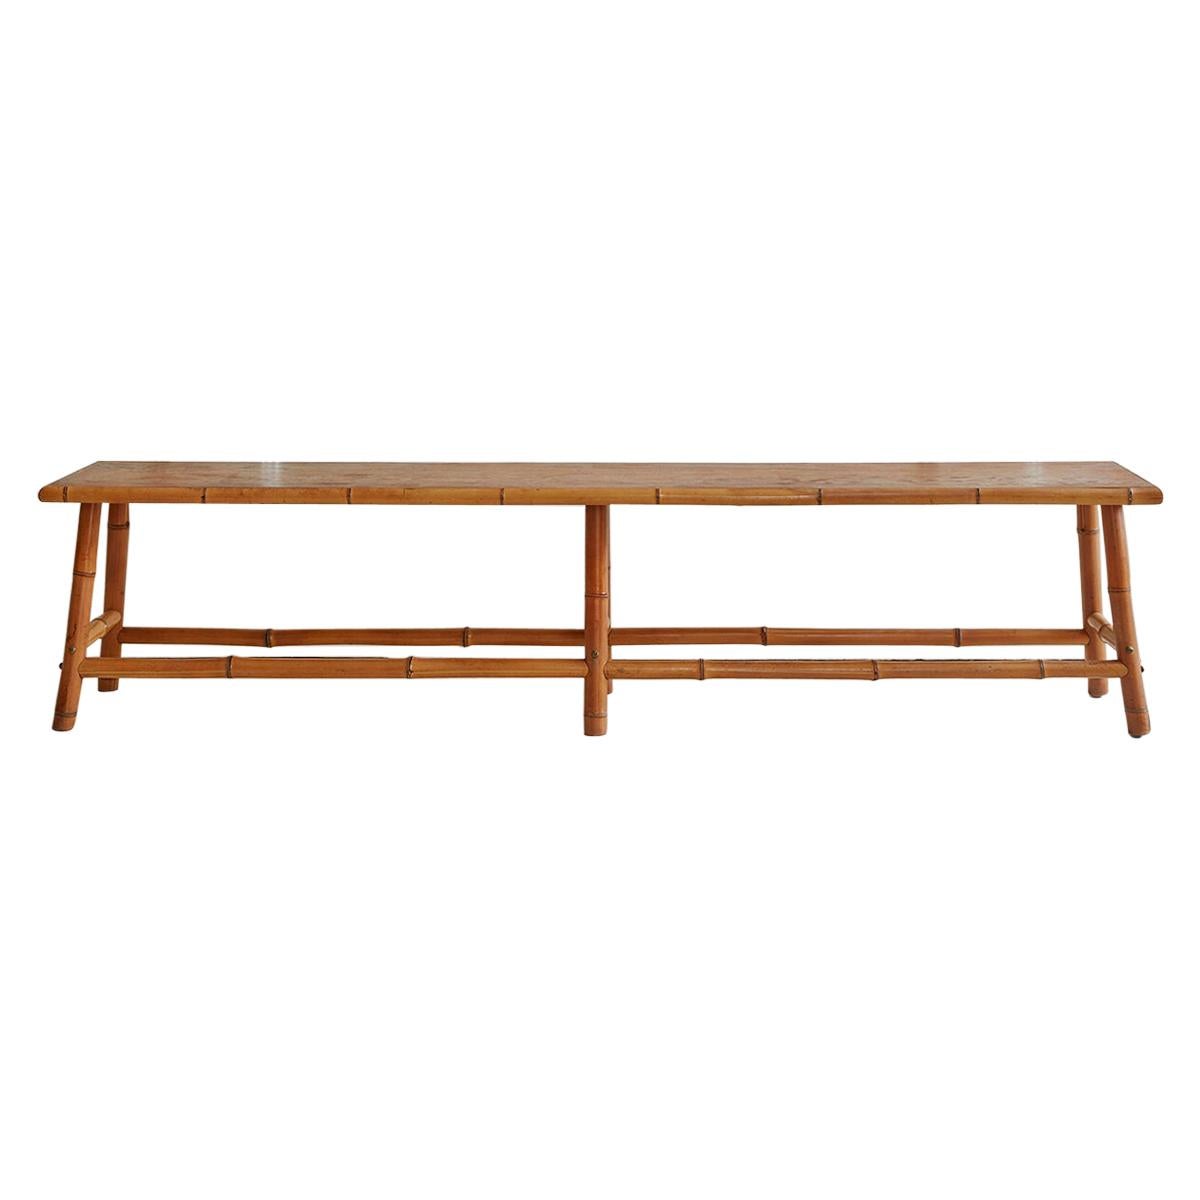 Vintage Bench with Bamboo Legs and Wooden Seat, France, 1960s